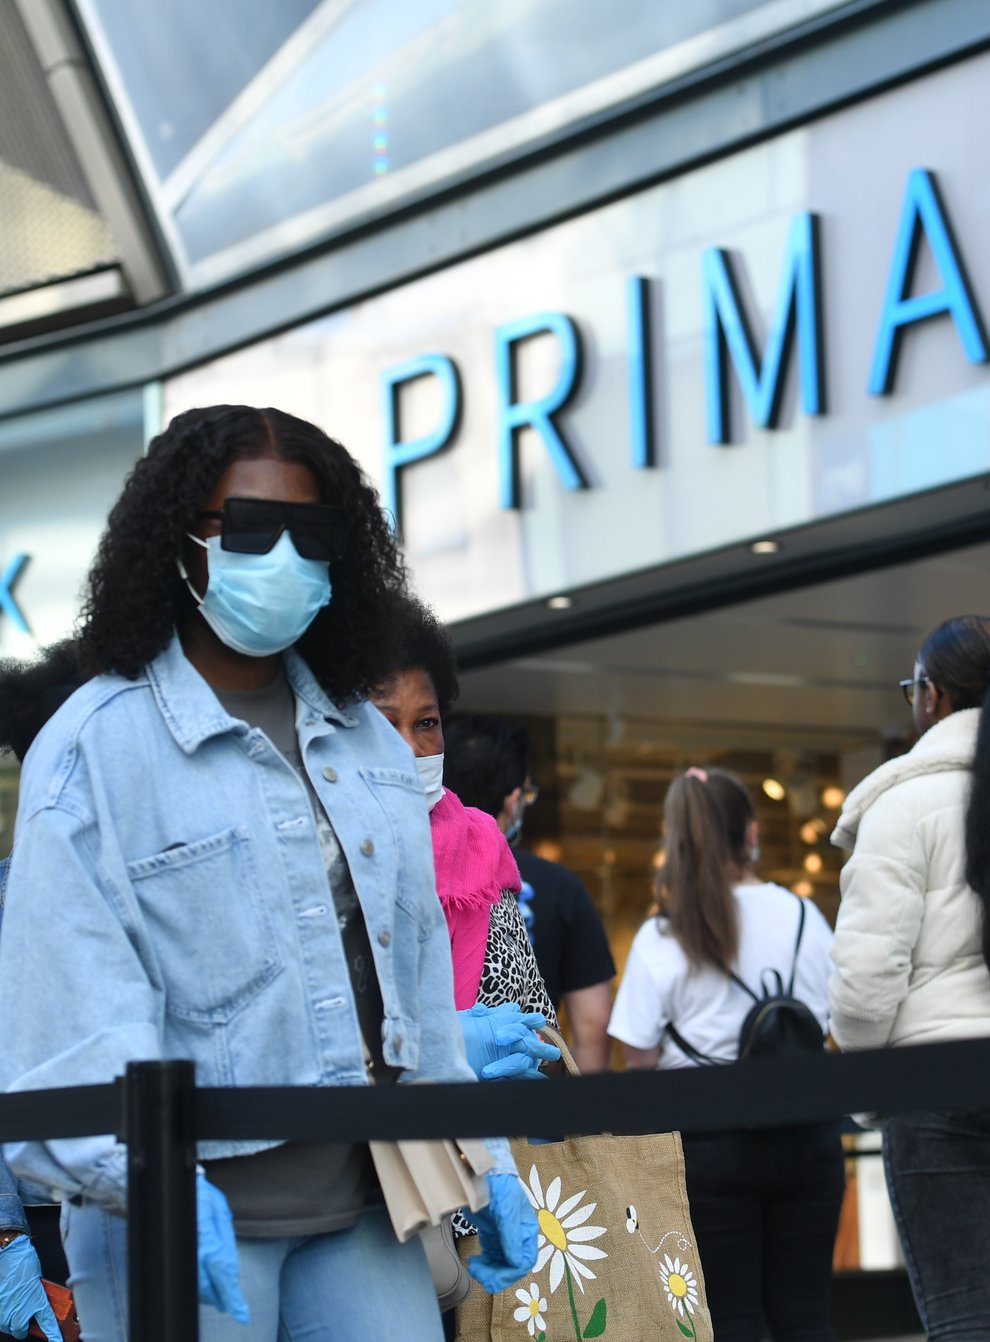 A woman wearing a face mask walks past a Primark store